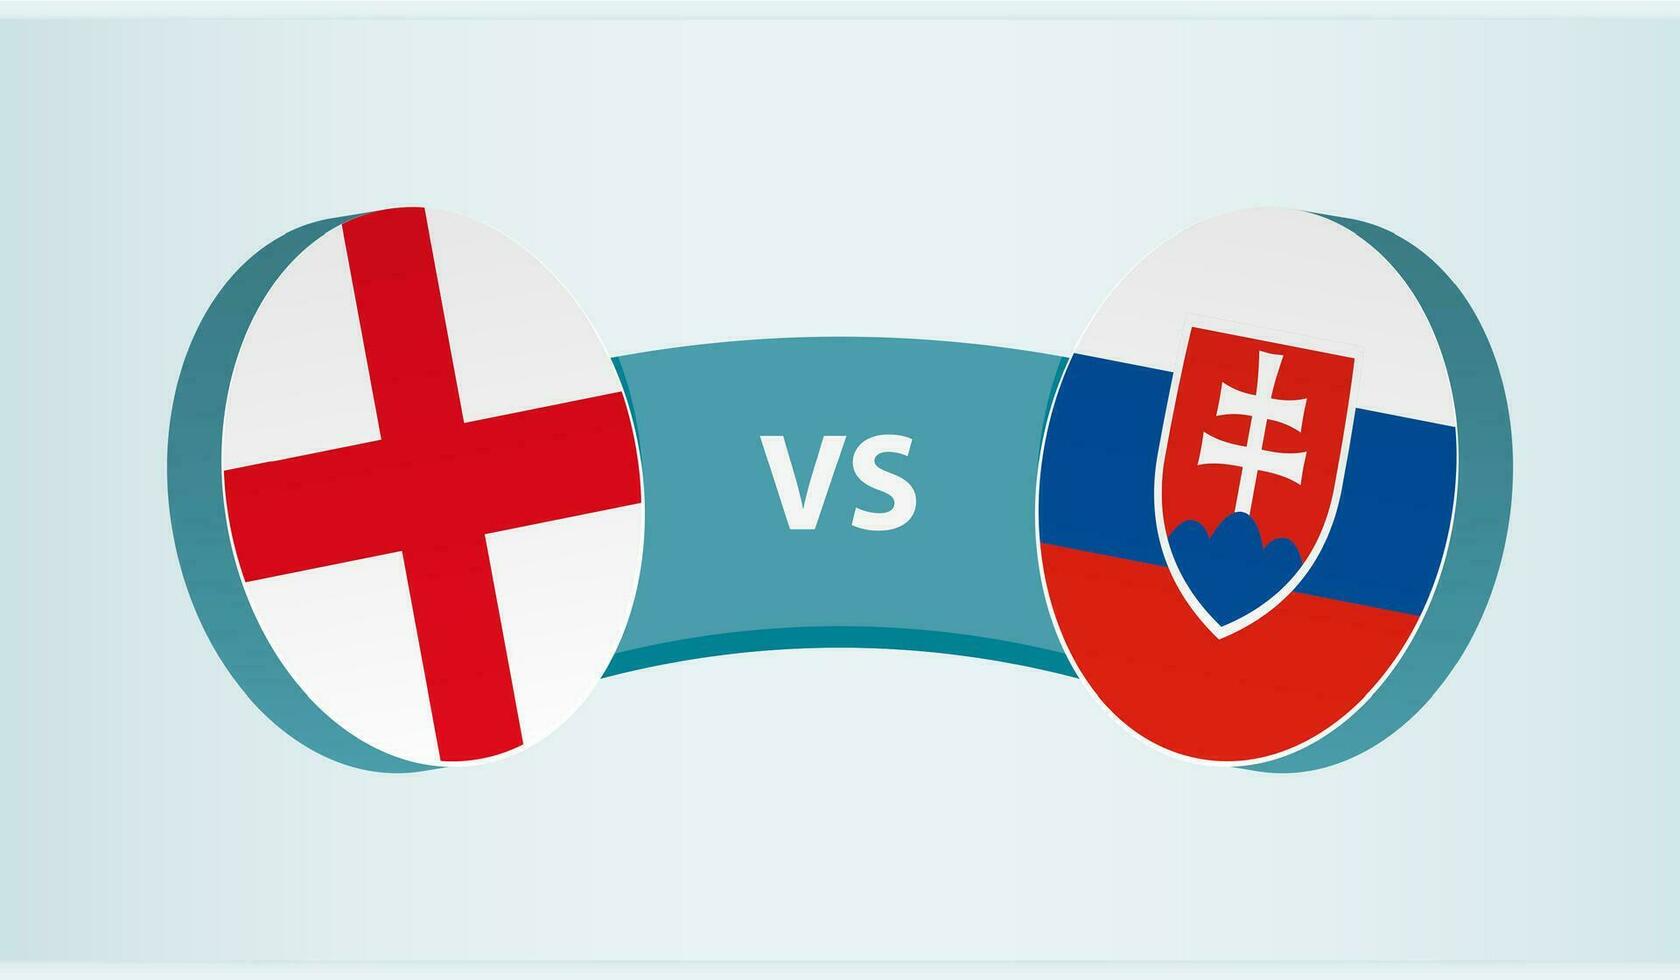 England versus Slovakia, team sports competition concept. vector